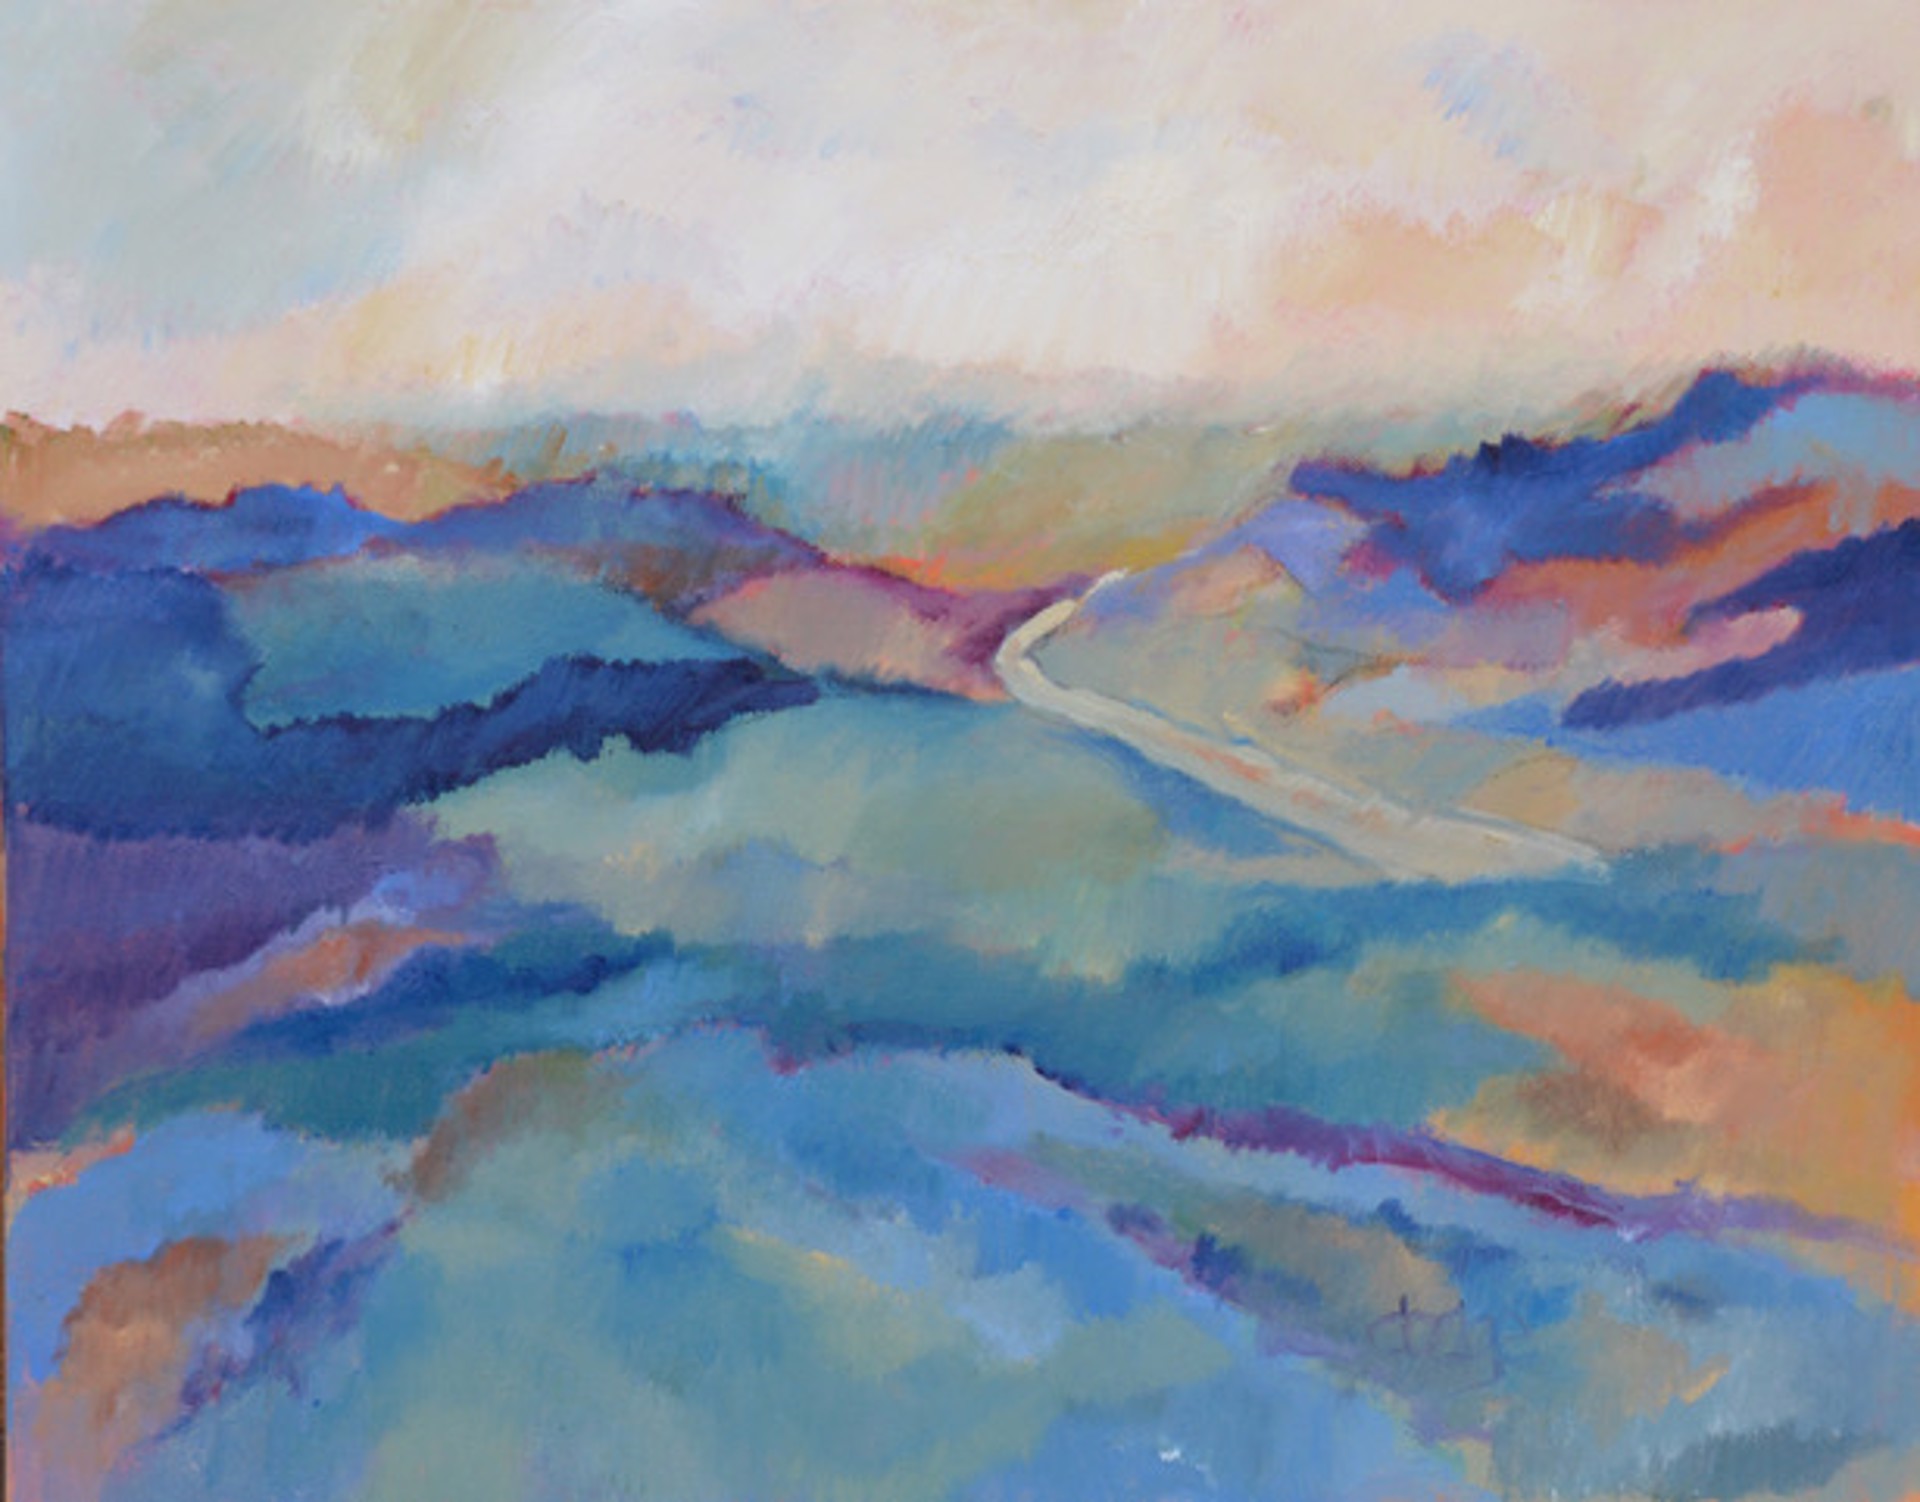 I-70 in Blue by Beverly Dodge Radefeld